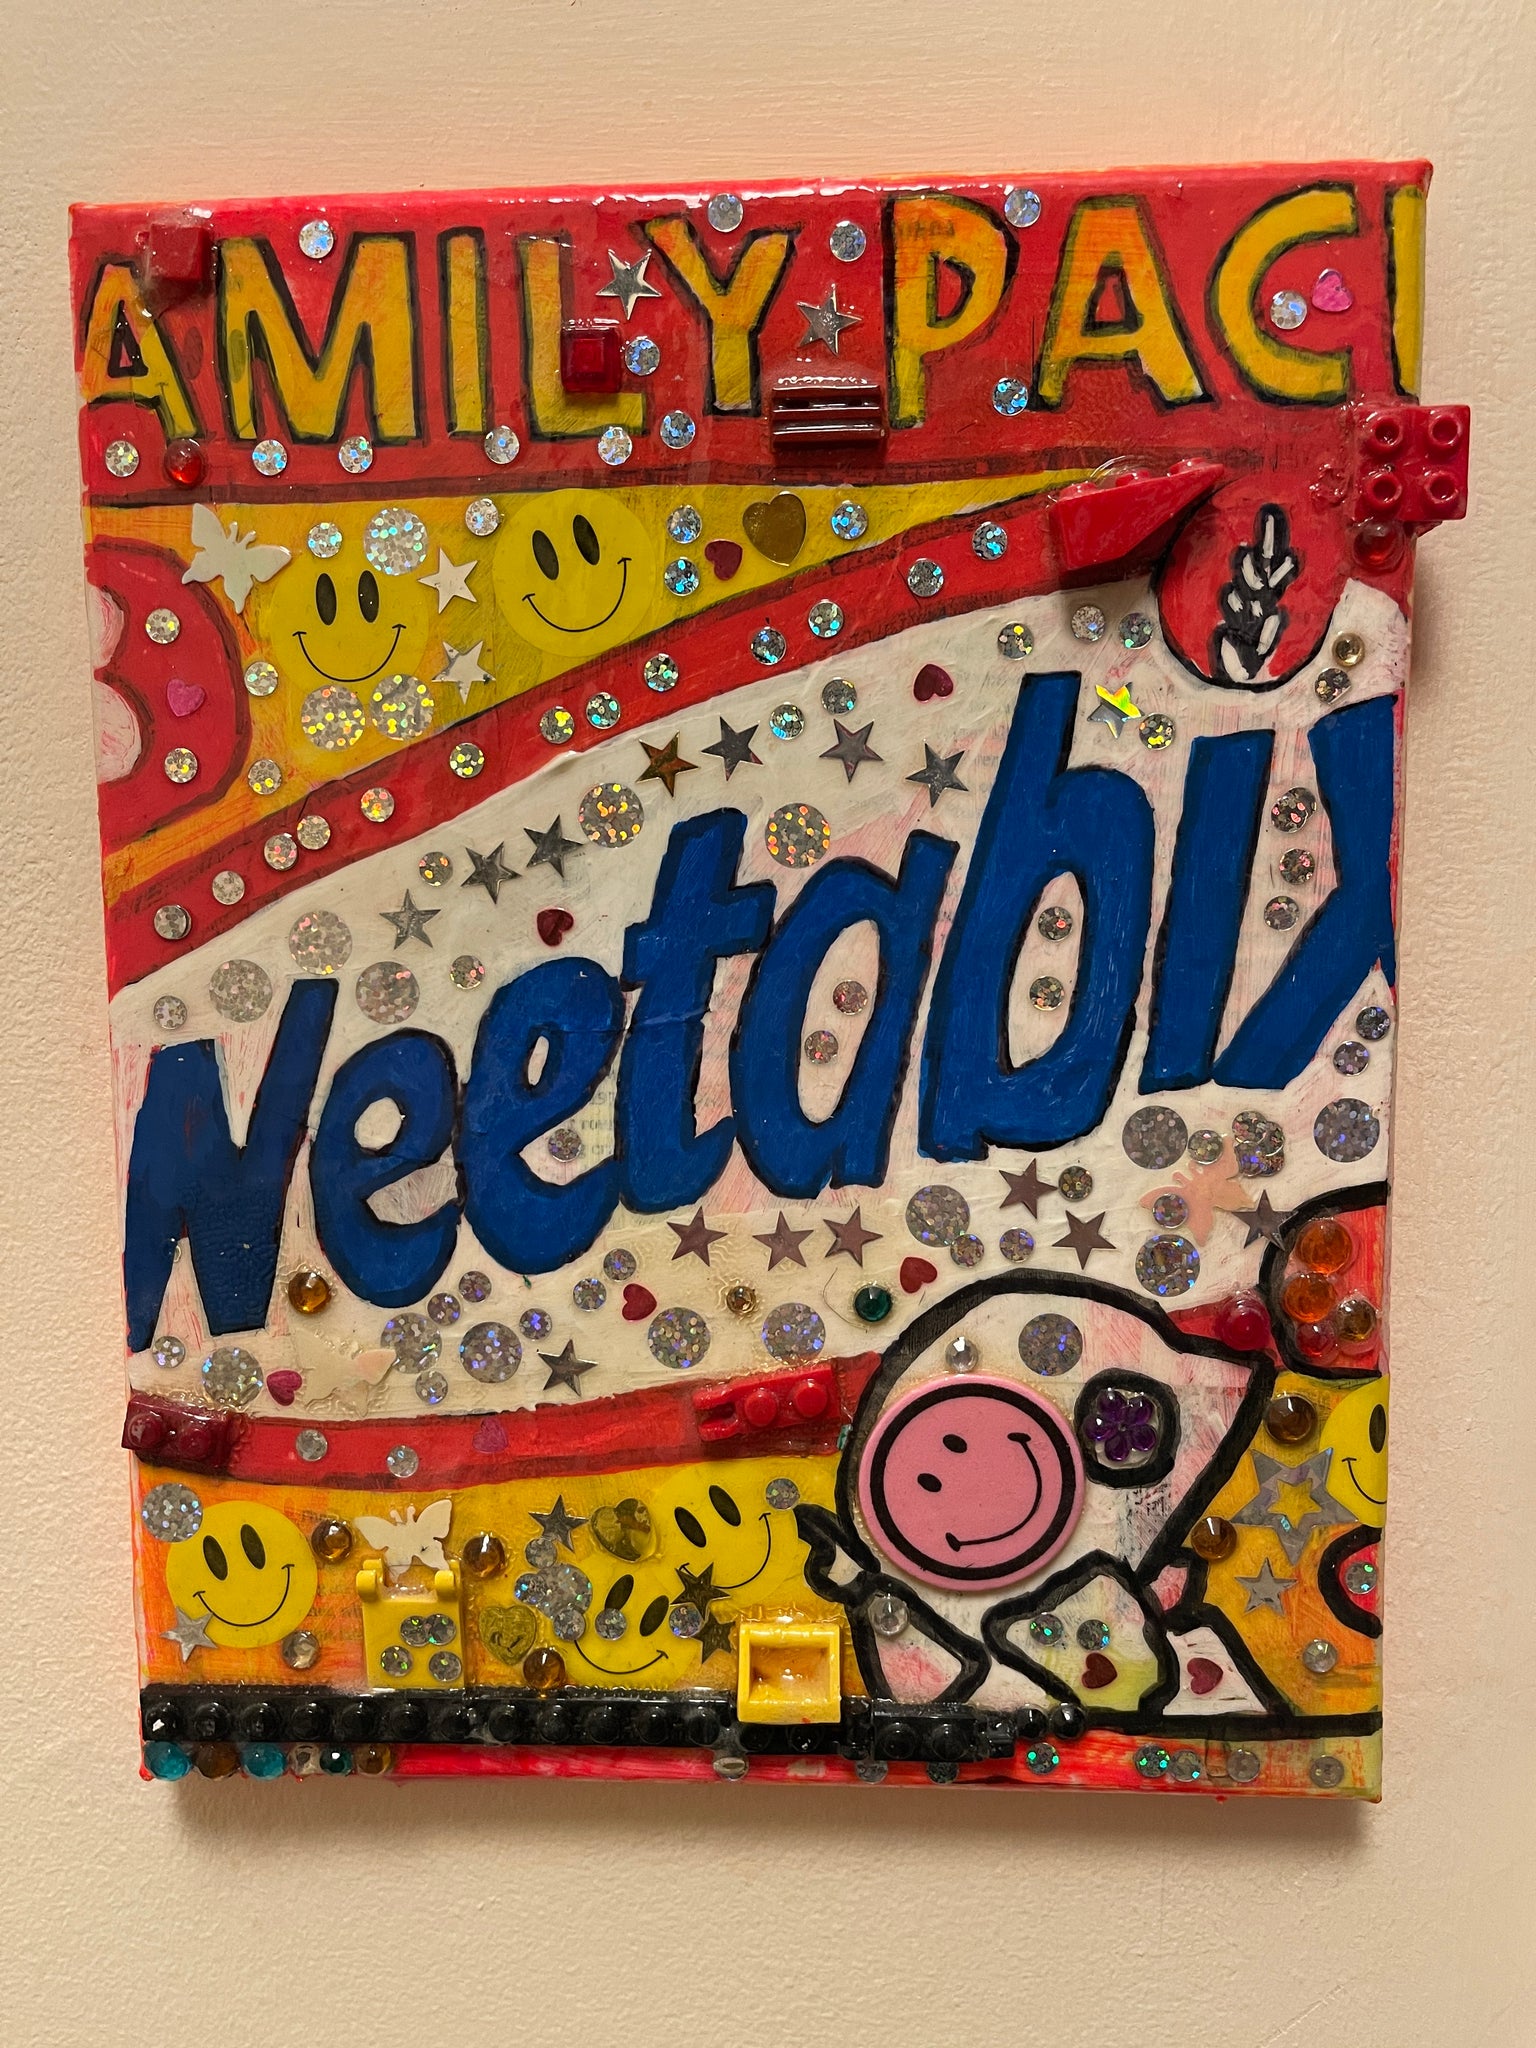 Weetabix Painting by Barrie J Davies 2022, mixed media on canvas, Unframed and ready to hang, 25cm x 20cm.